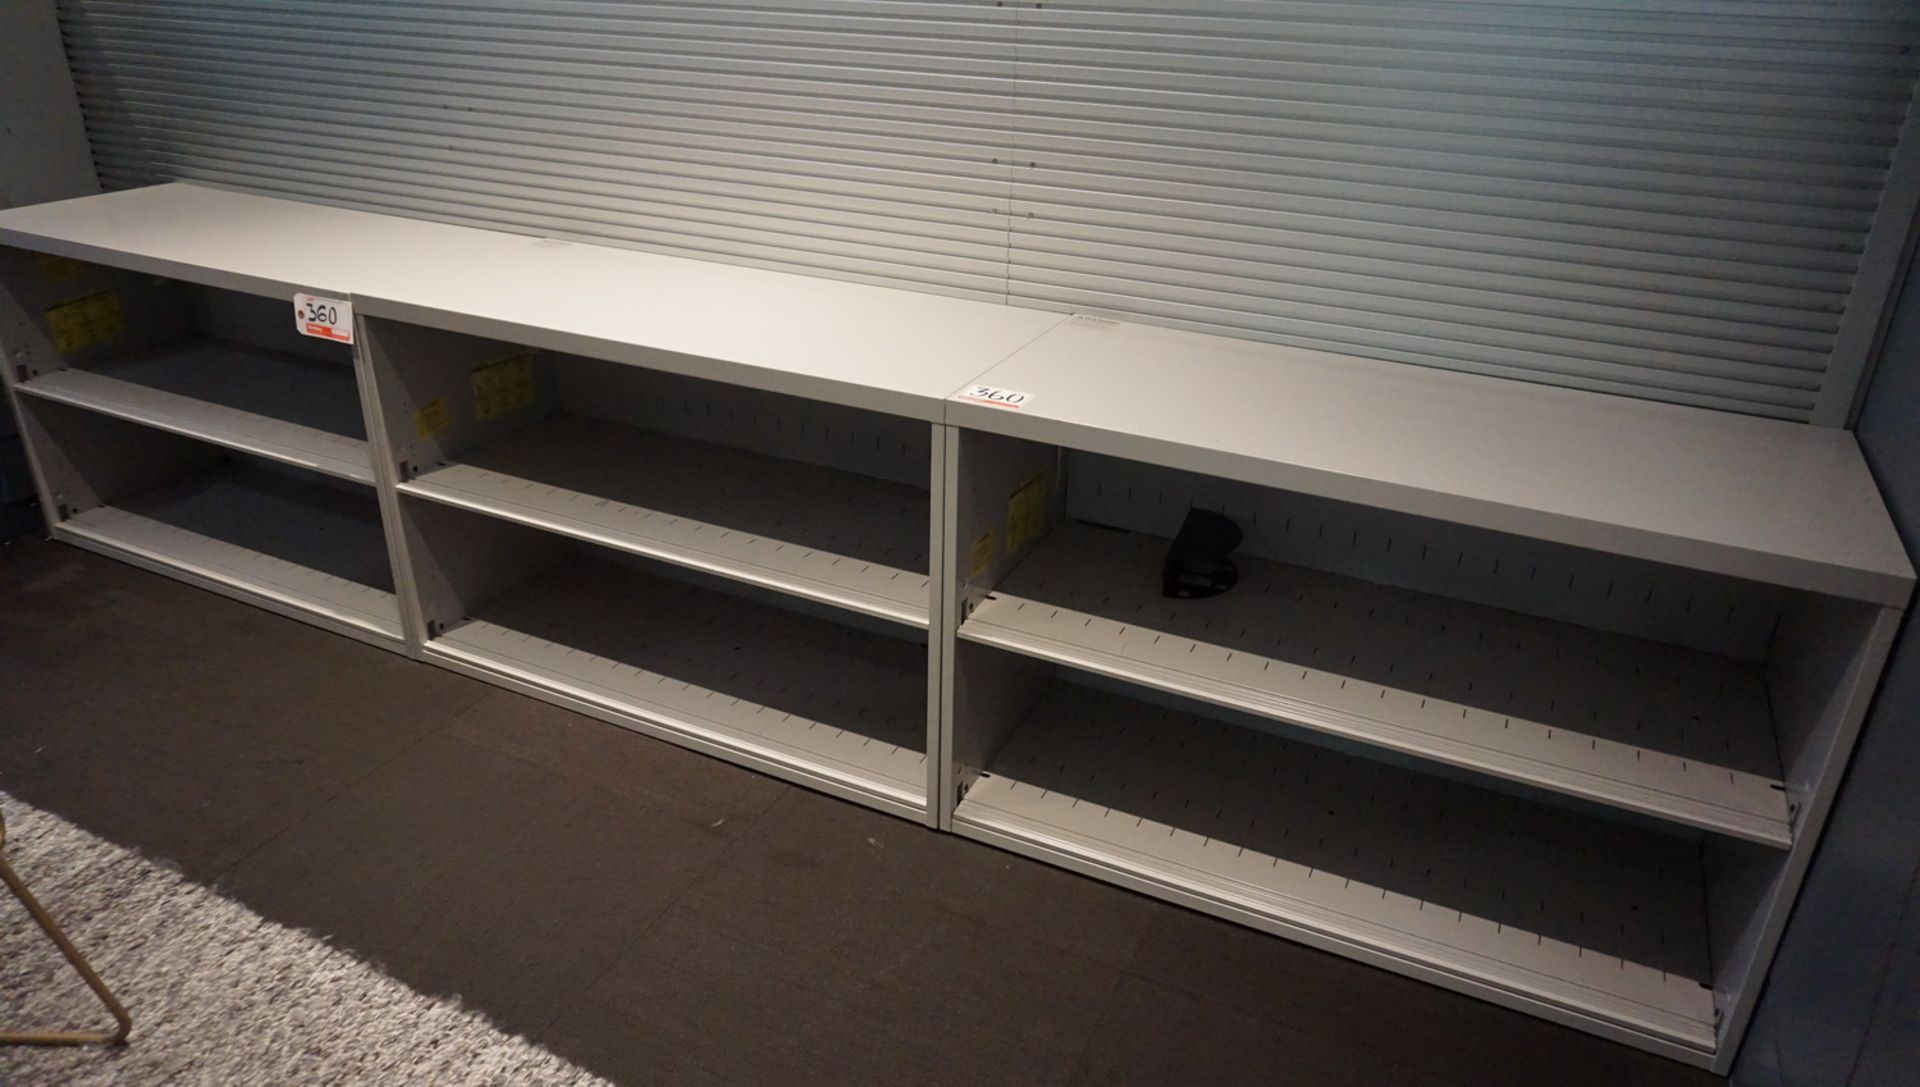 UNITS - GREY STEEL 42" X 27" BOOKCASES